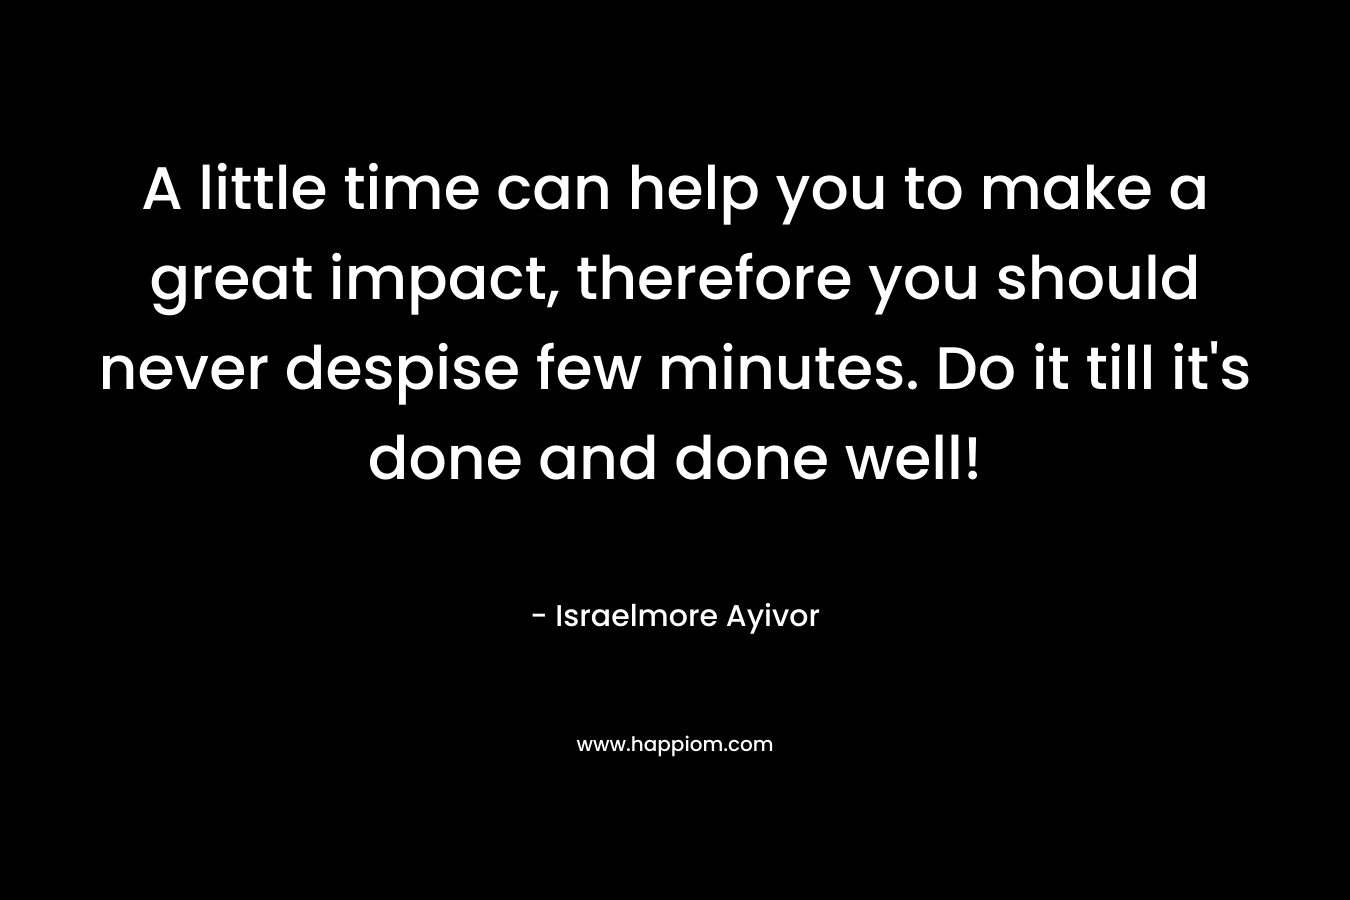 A little time can help you to make a great impact, therefore you should never despise few minutes. Do it till it's done and done well!